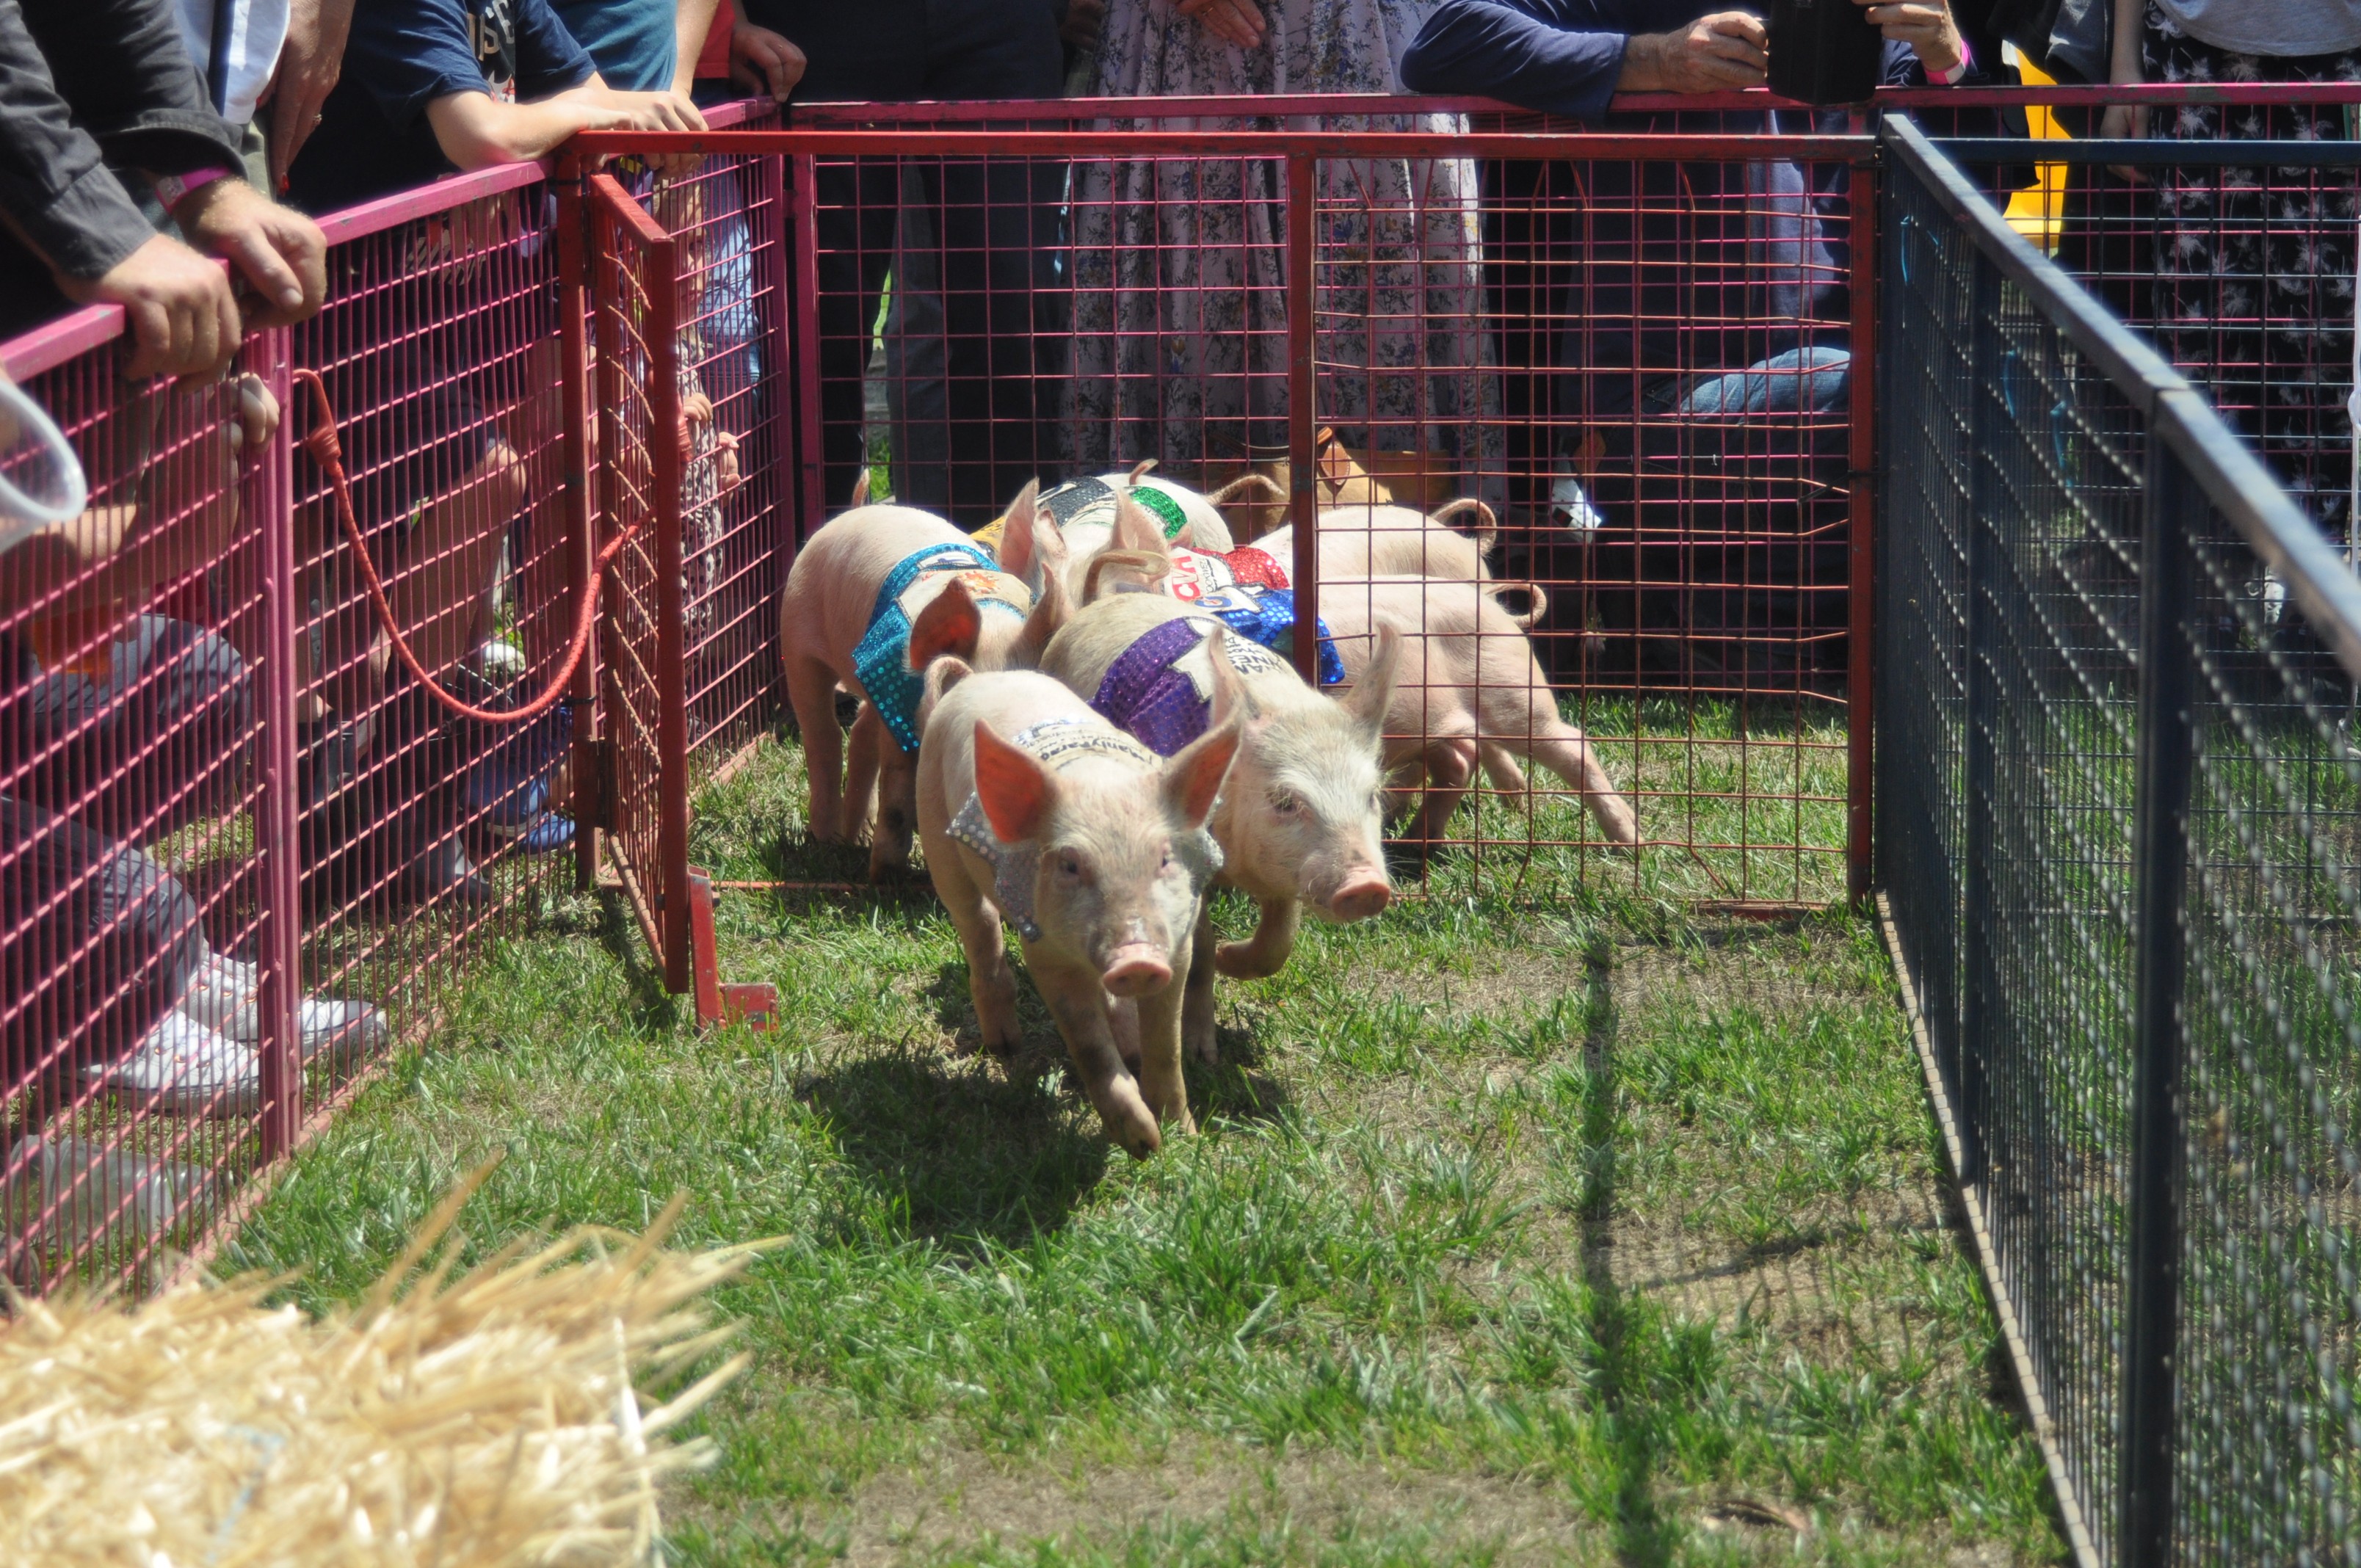 For a crackling good time, trot out to Laggan for the town's annual piglet races